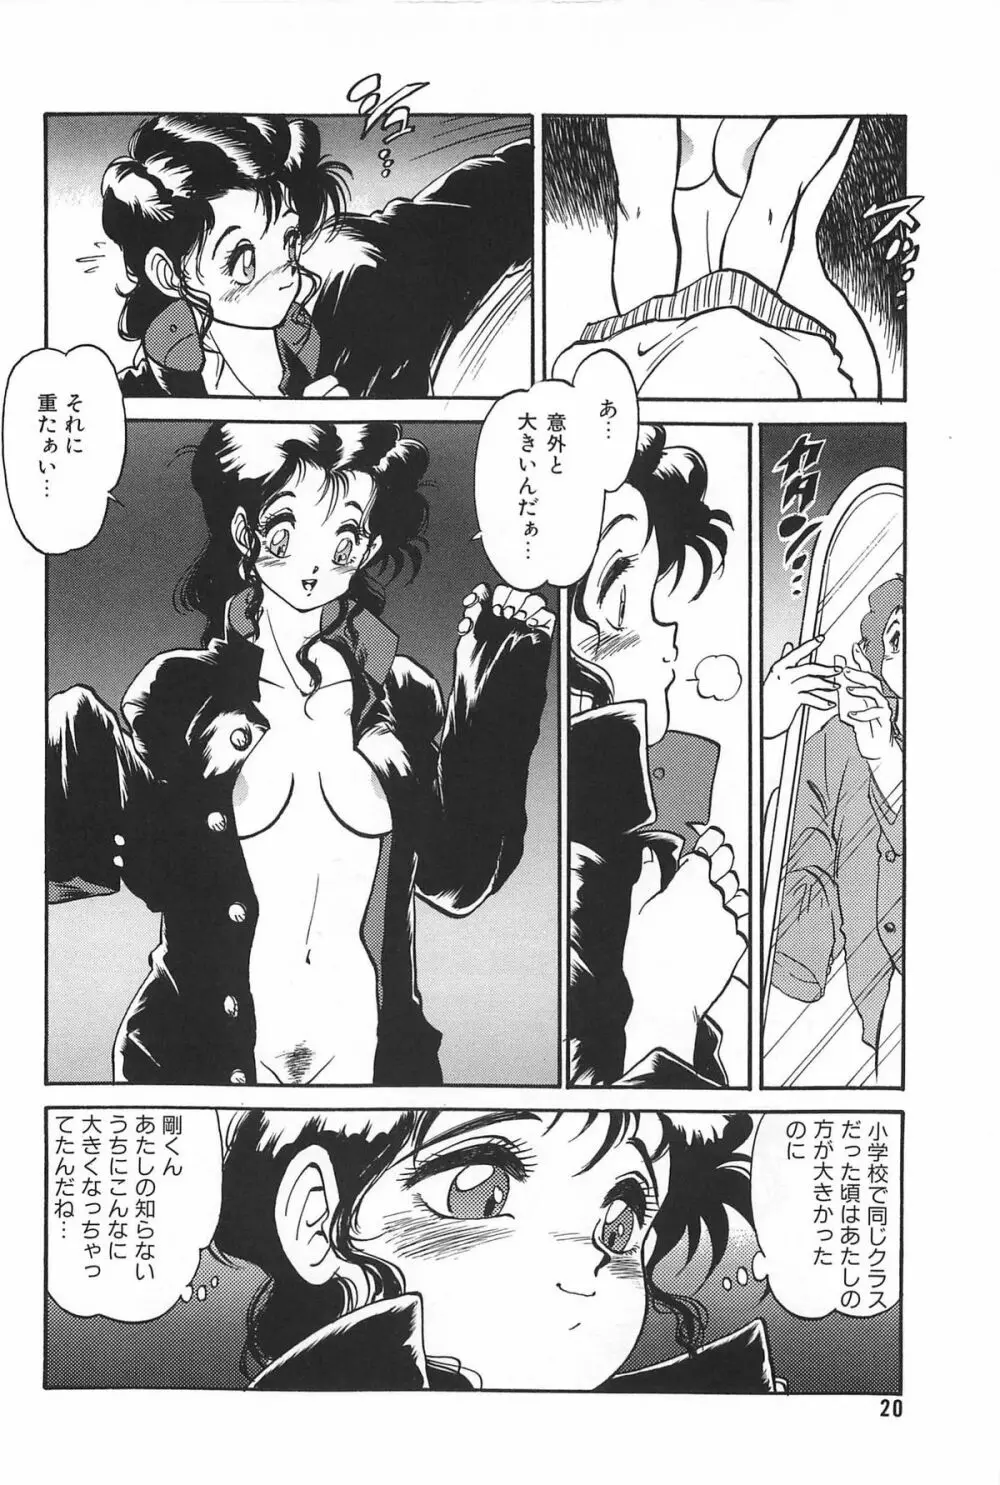 LOVE ME 1995 Page.22